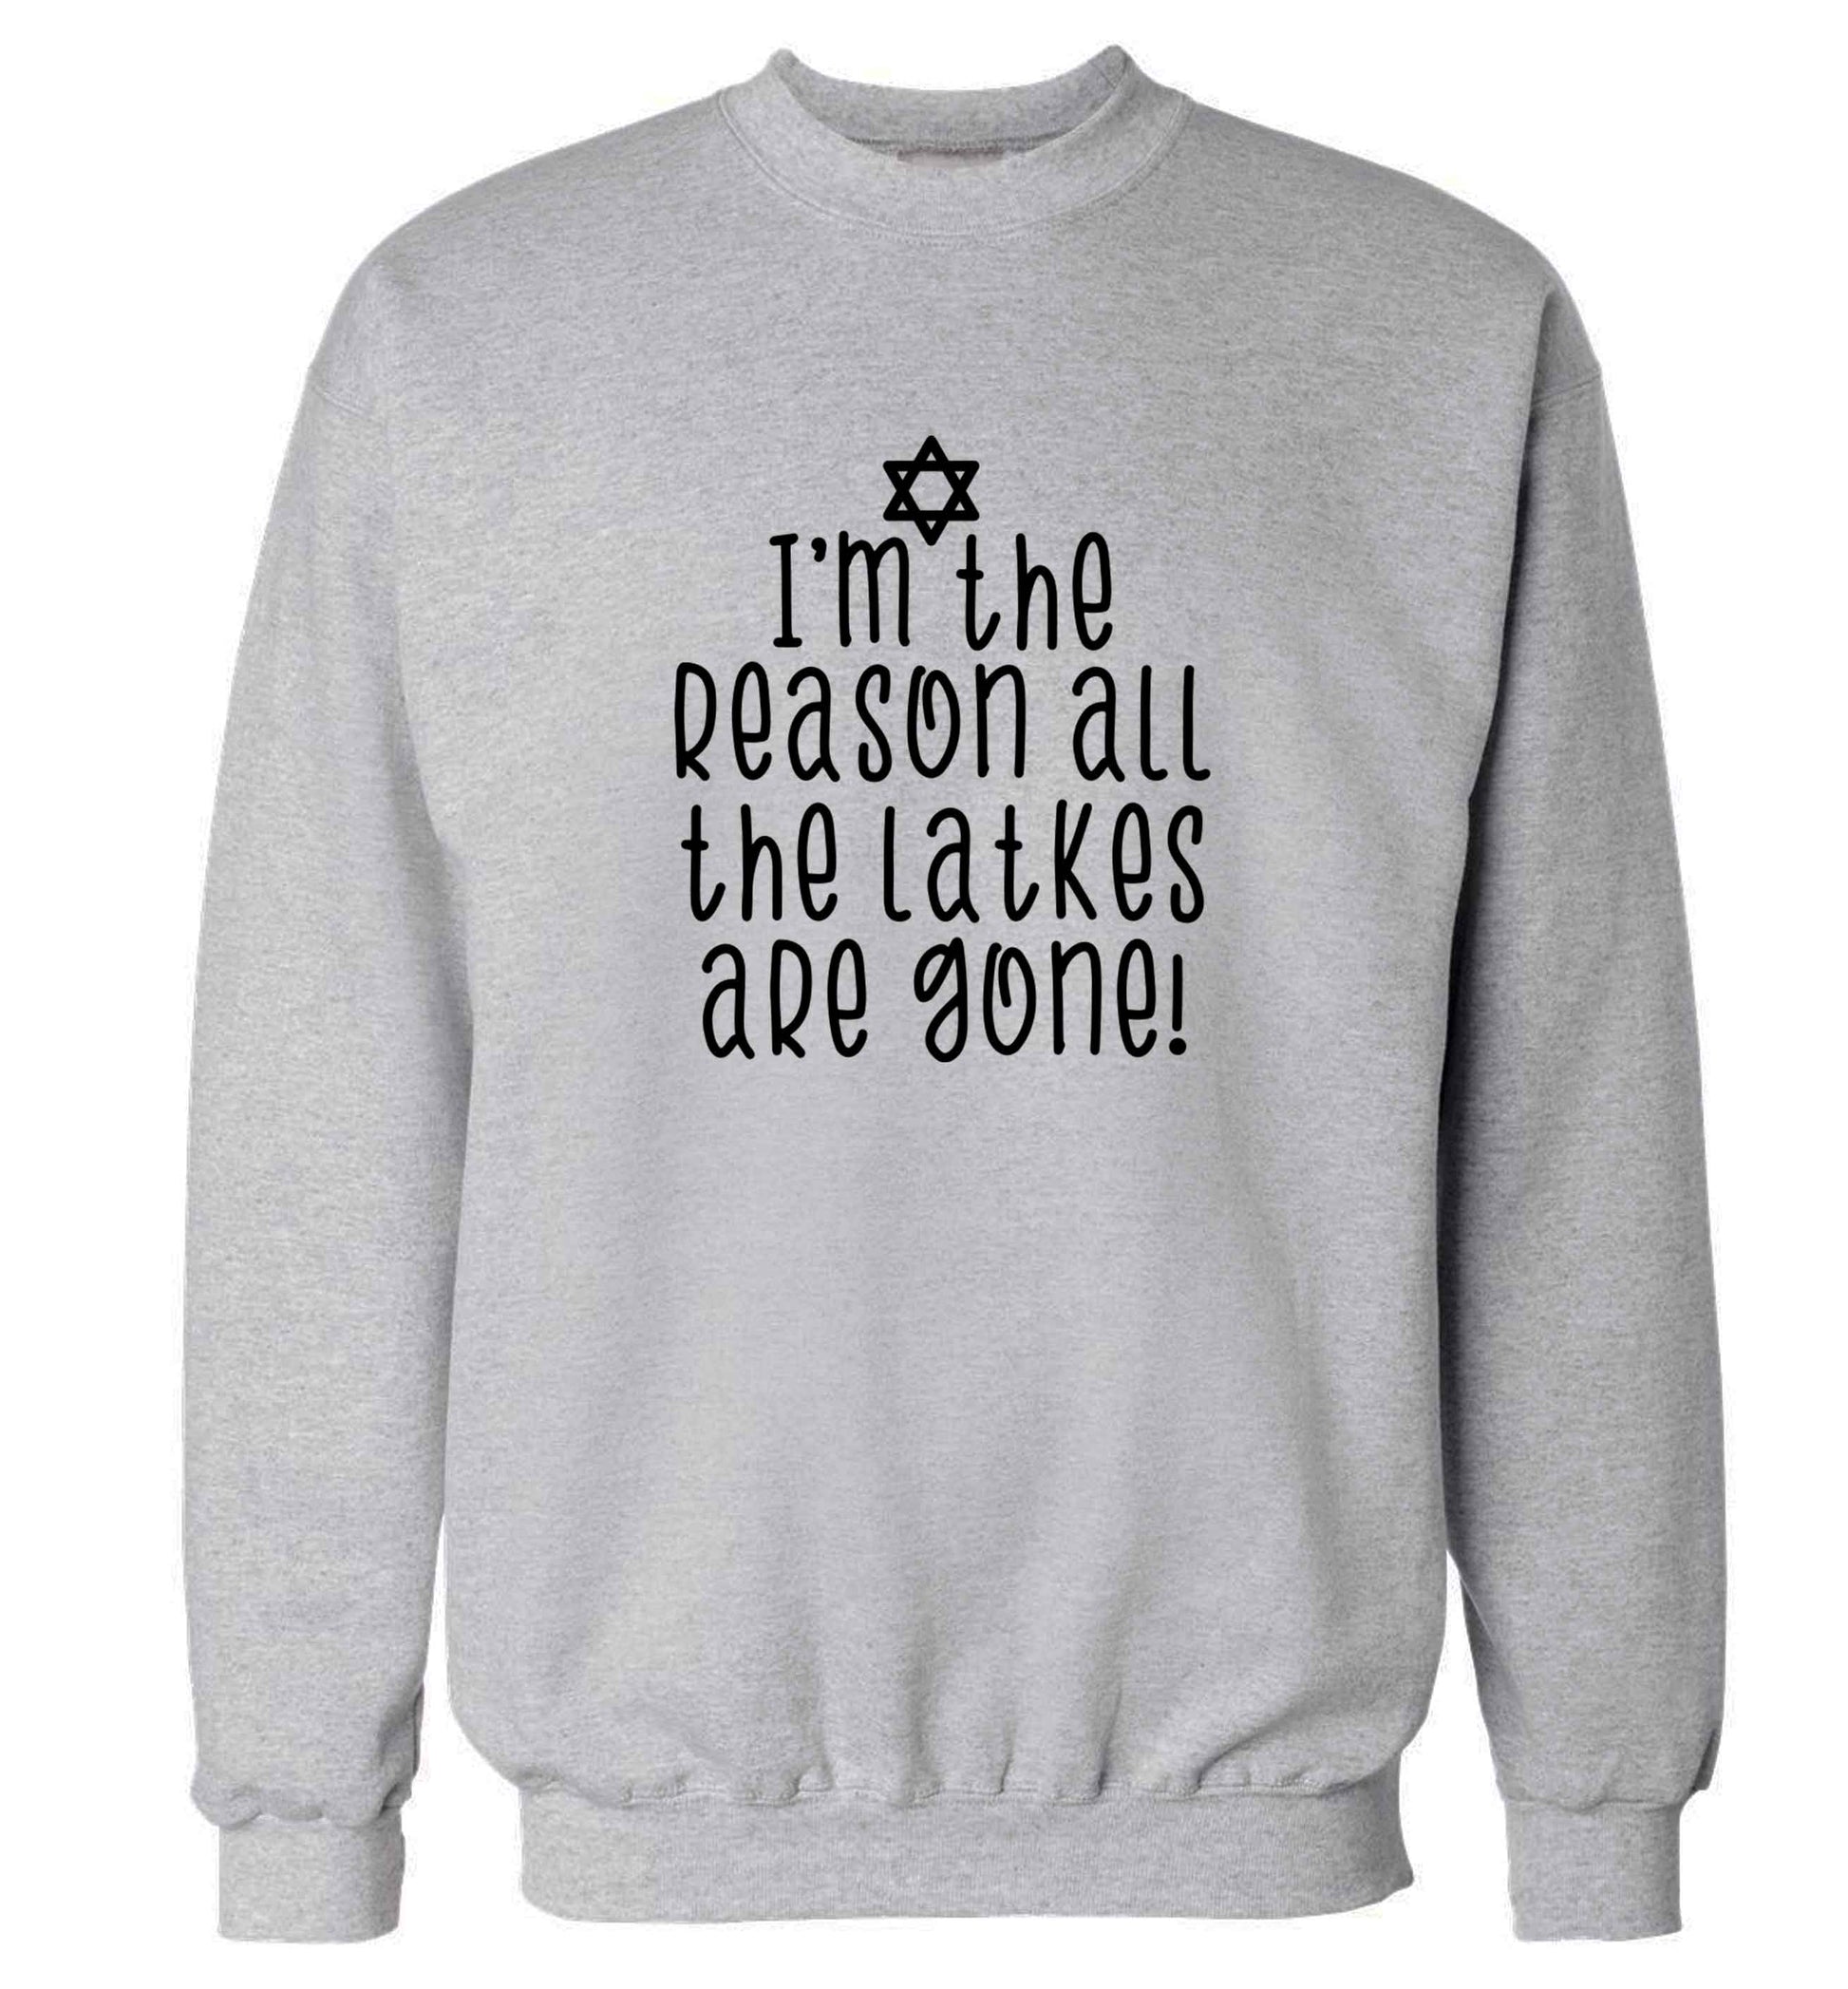 I'm the reason all the latkes are gone adult's unisex grey sweater 2XL